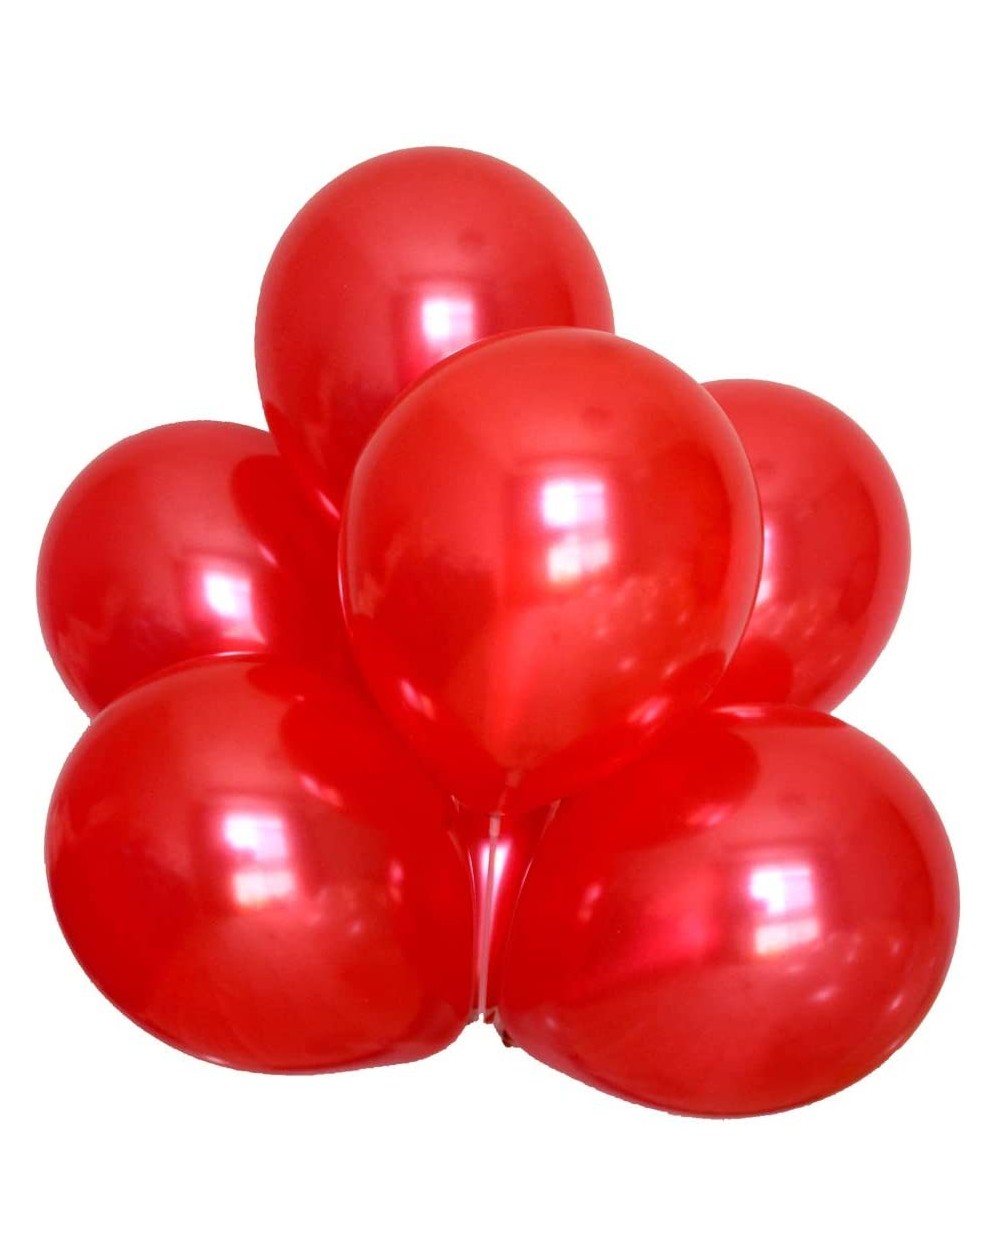 Balloons Balloon 12 inch red Pearlized/Metallic Balloon for Party Decoration- 100 Pieces Packing (red) - Red - C8196Z02XE5 $1...